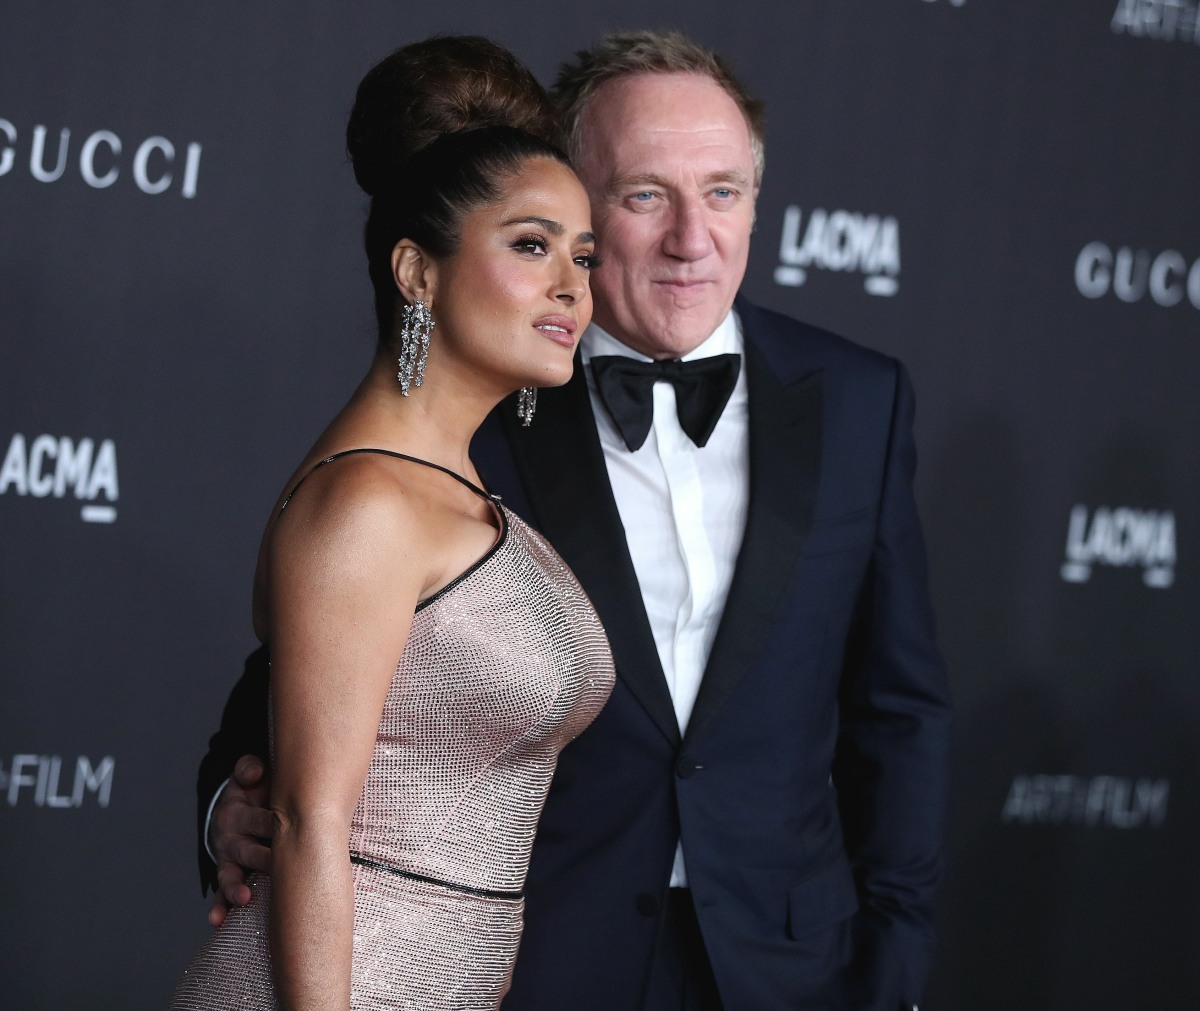 Salma Hayek Pinault and Francois-Henri Pinault arrive at the 2019 LACMA Art + Film Gala held at the Los Angeles County Museum of Art on November 2, 2019 in Los Angeles, California, United States.